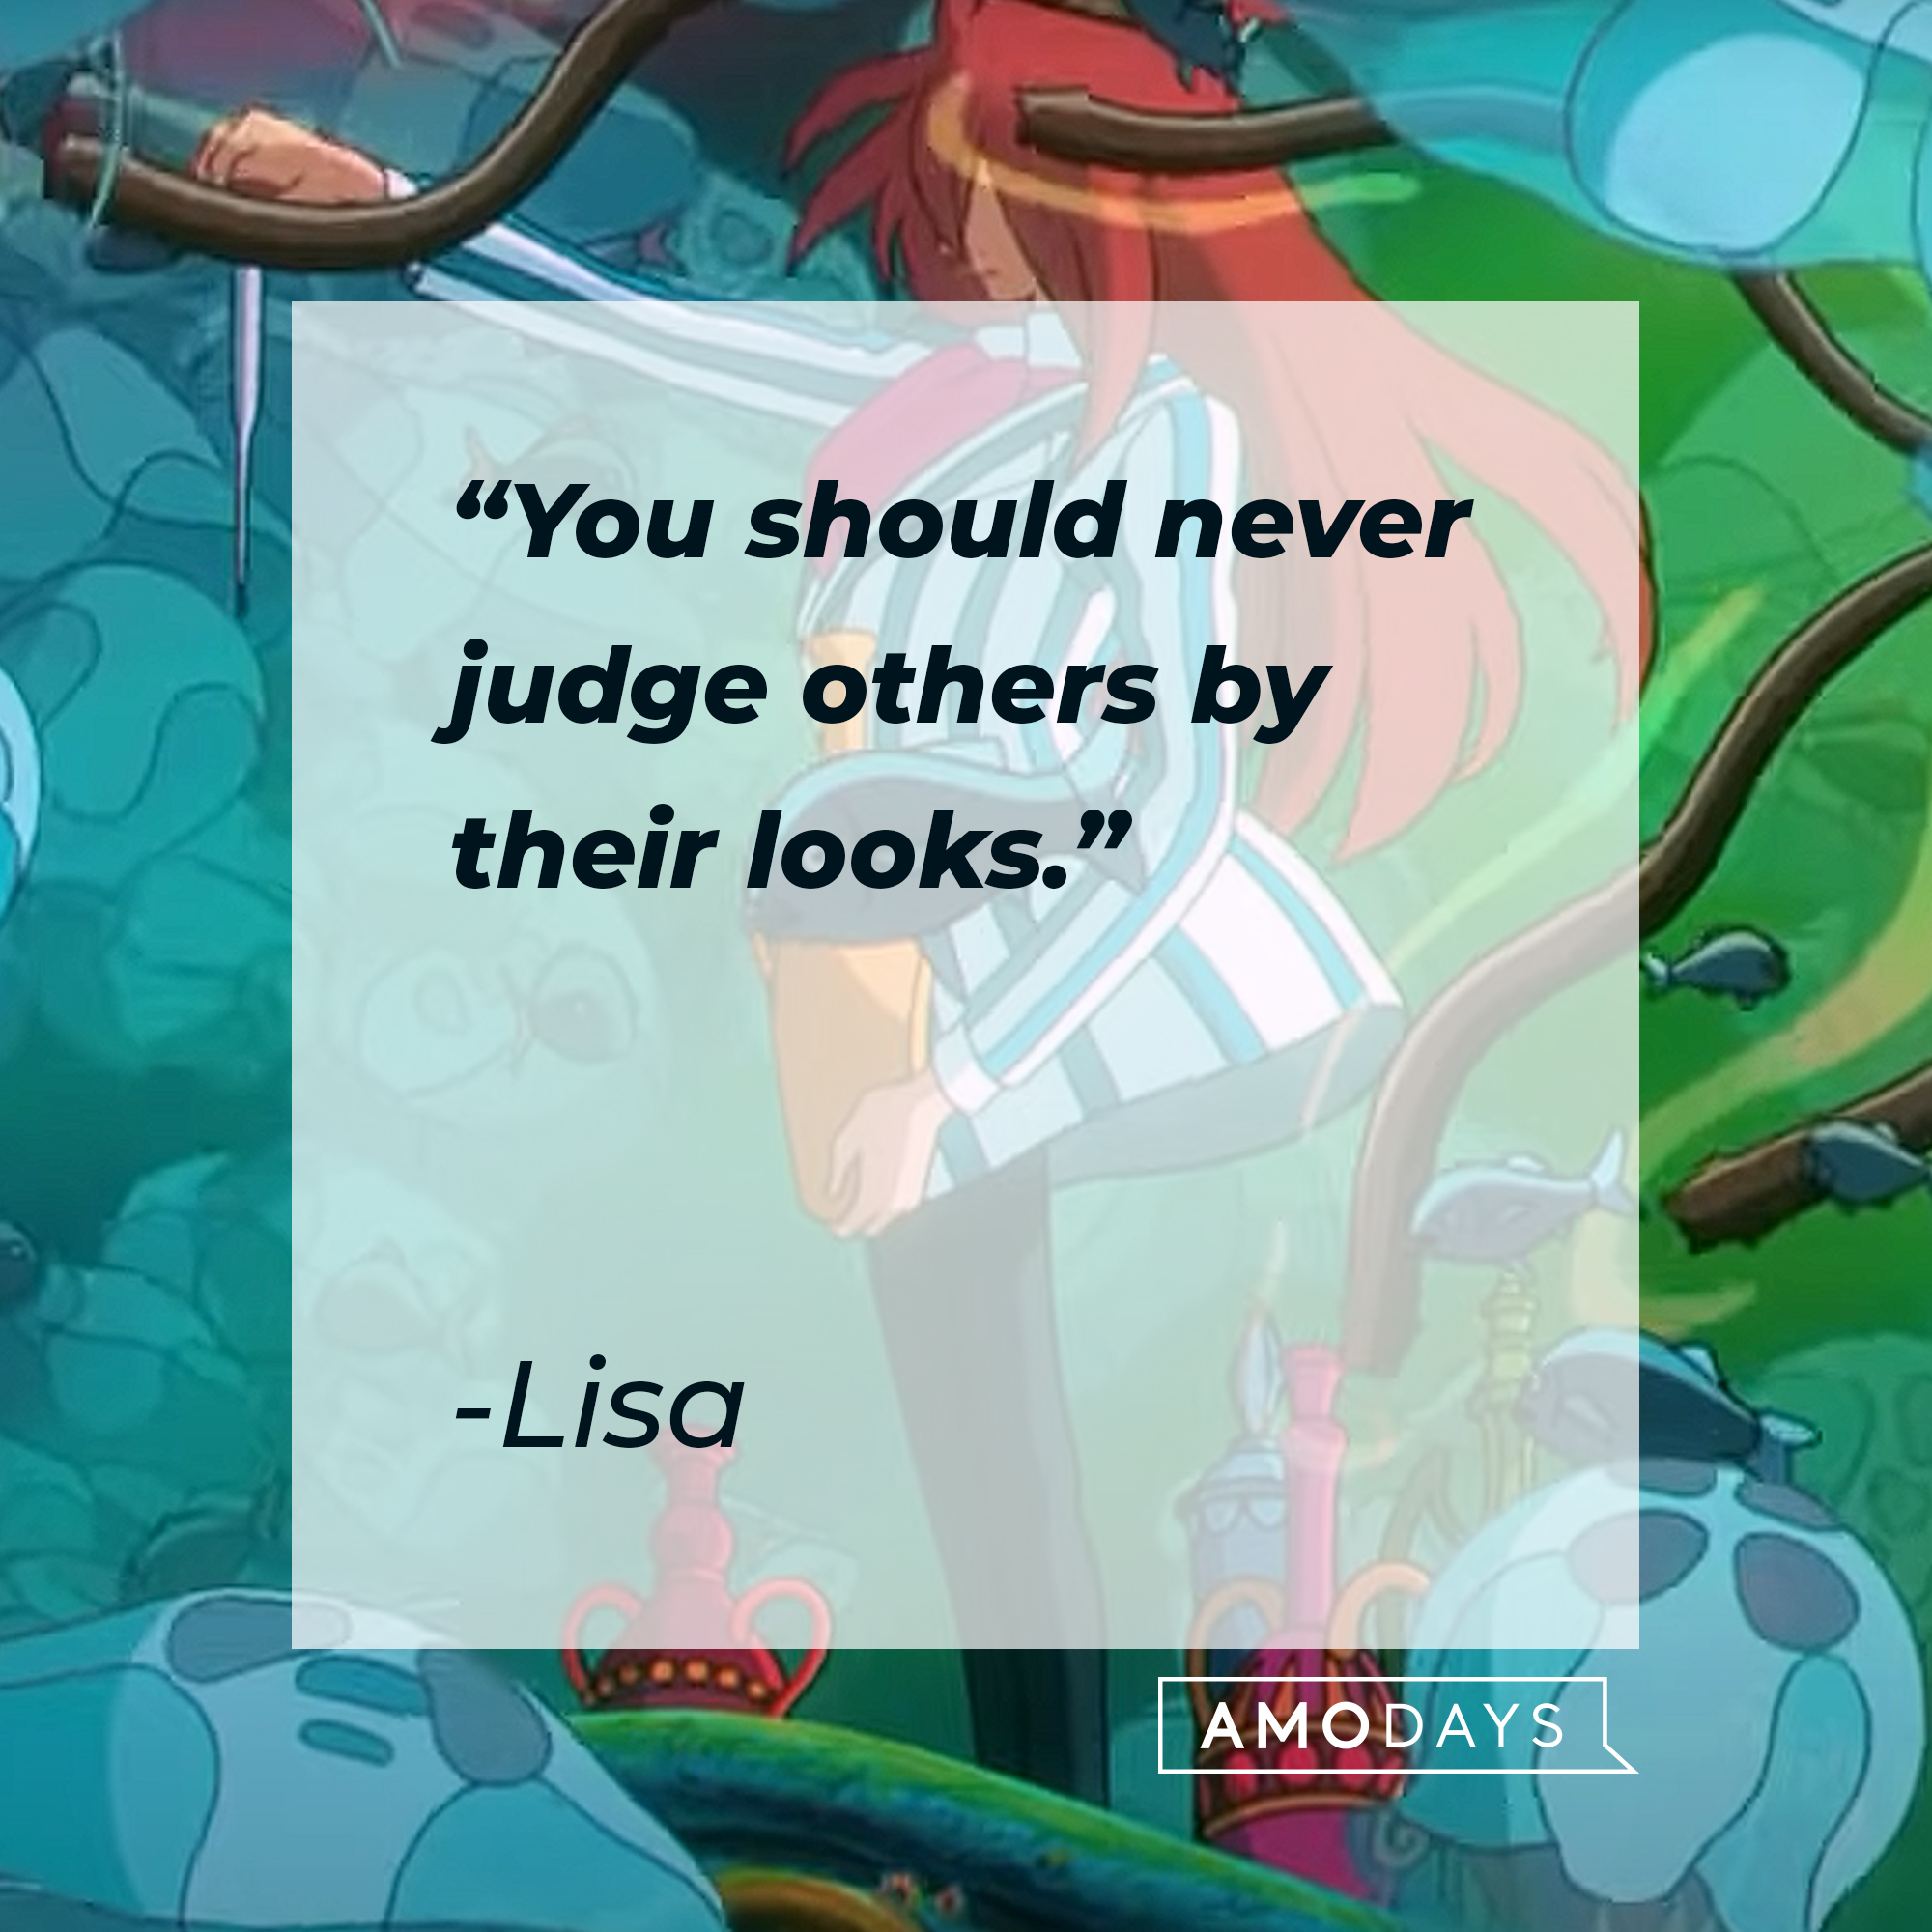 Lisa's quote: "You should never judge others by their looks." | Source: Youtube.com/crunchyrollstoreau